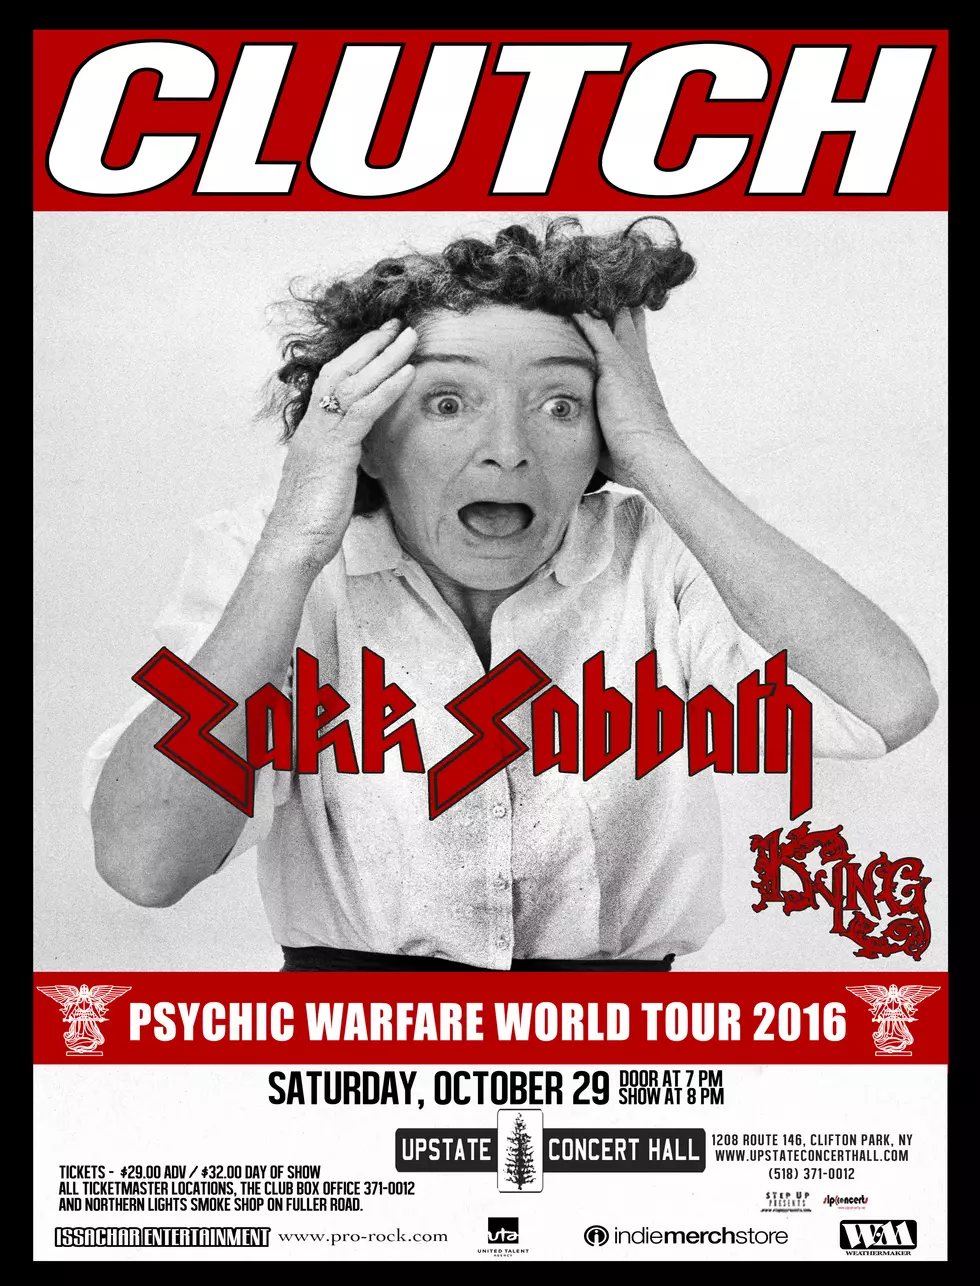 Last Chance To Score Tickets To See Clutch And Zakk Sabbath At UCH